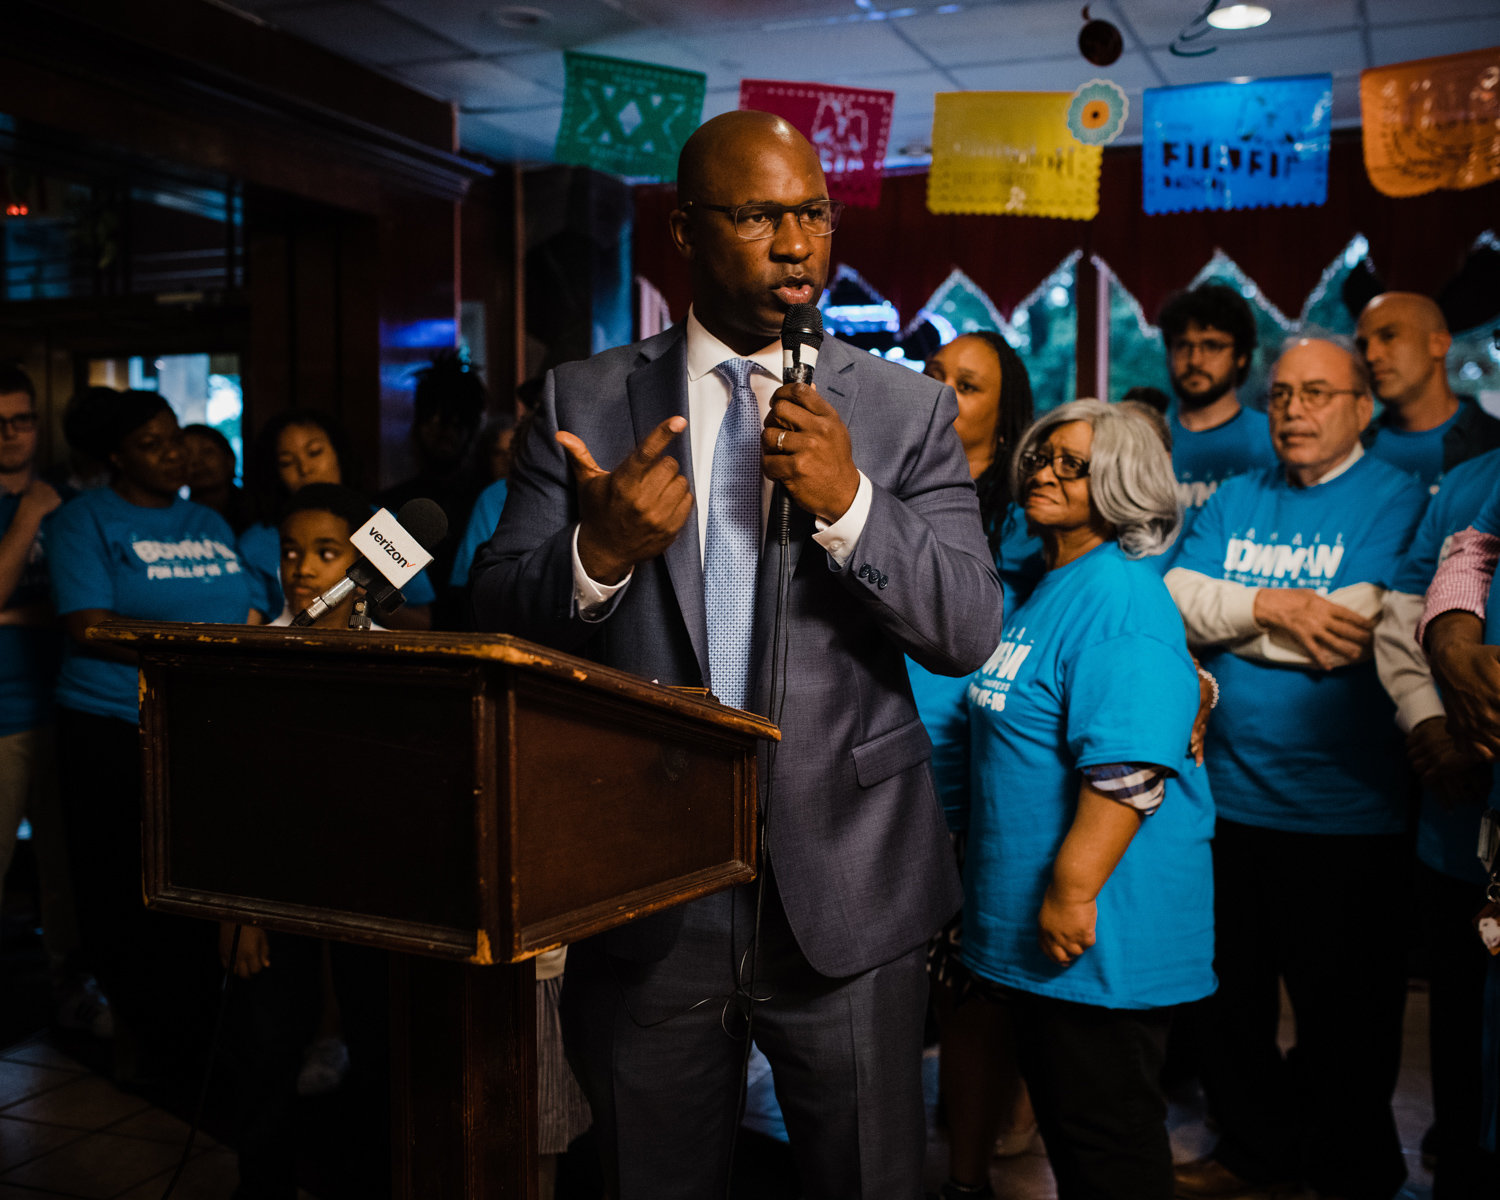 Jamaal Bowman is now officially on the path to become a congressman representing New York's 16th Congressional District.